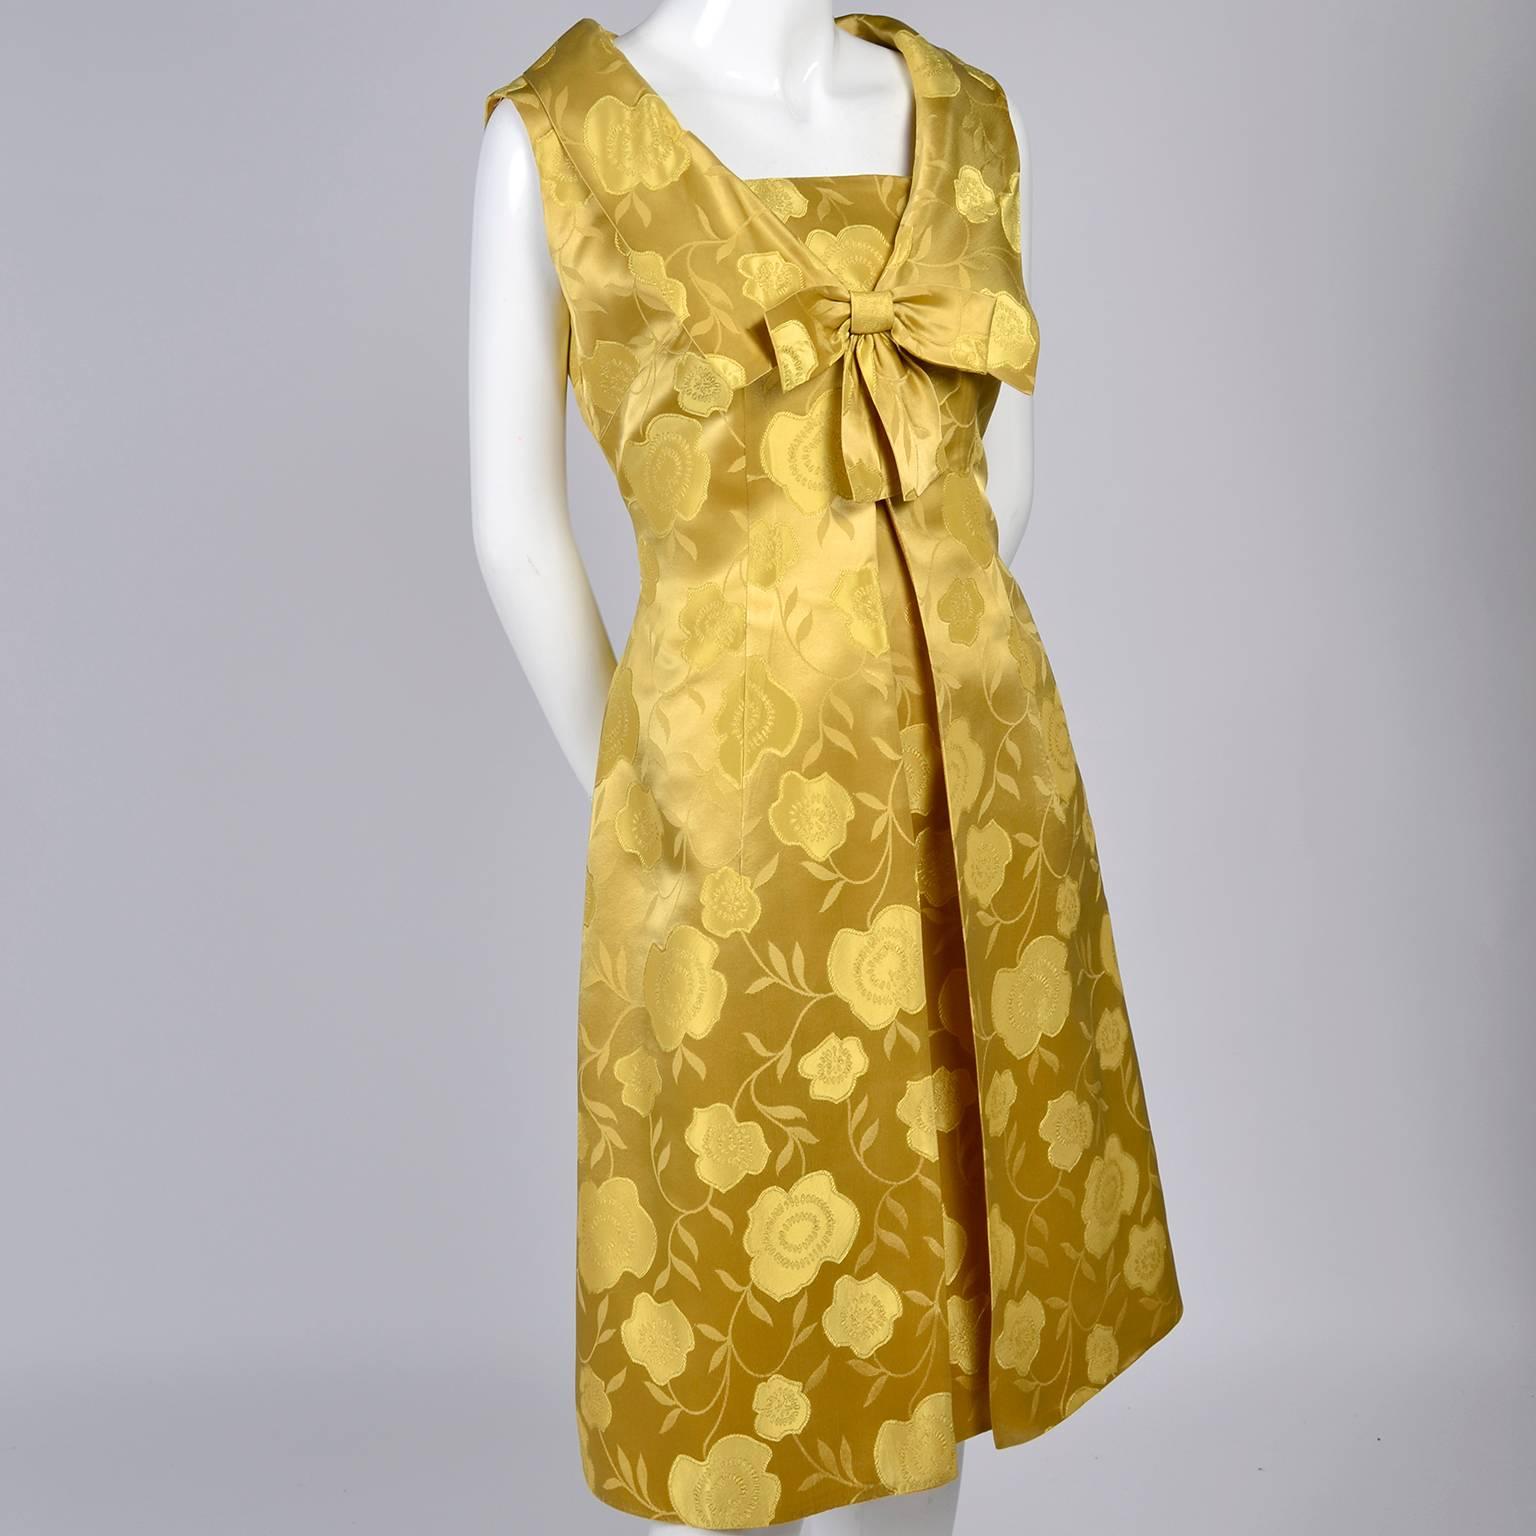 Brown 1960s Vintage Cocktail Dress Gold Brocade Satin W/ Sleeveless Bow Overdress